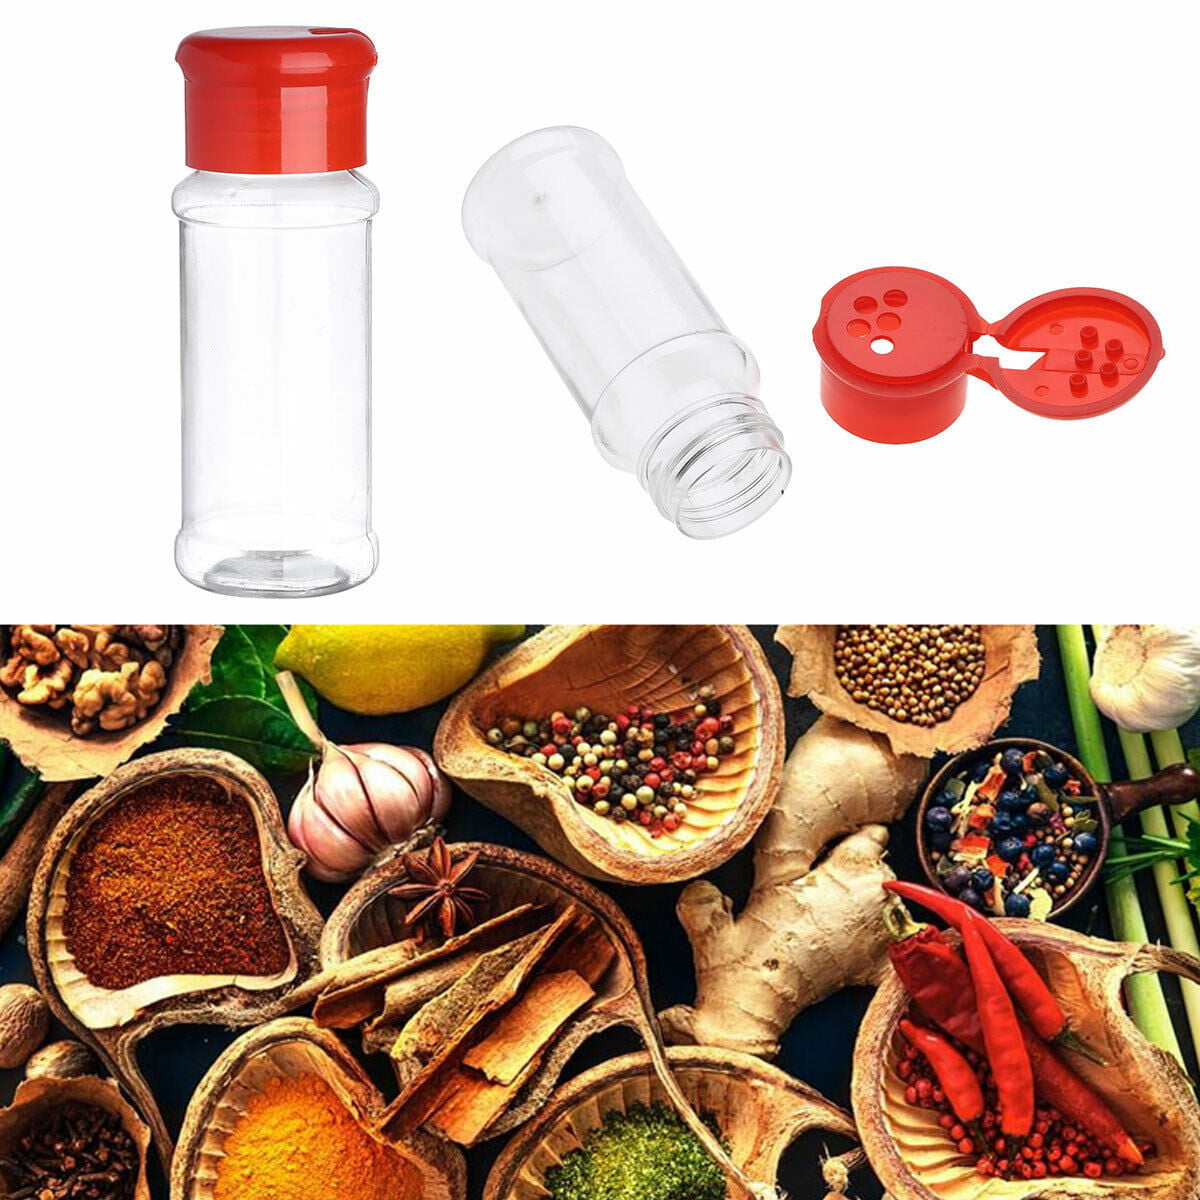 16 Pack 3.5 oz Plastic Spice Jars,Empty Seasoning Bottles Containers with  Shaker Lids for Storing Spice,Salt,Herbs,Powder